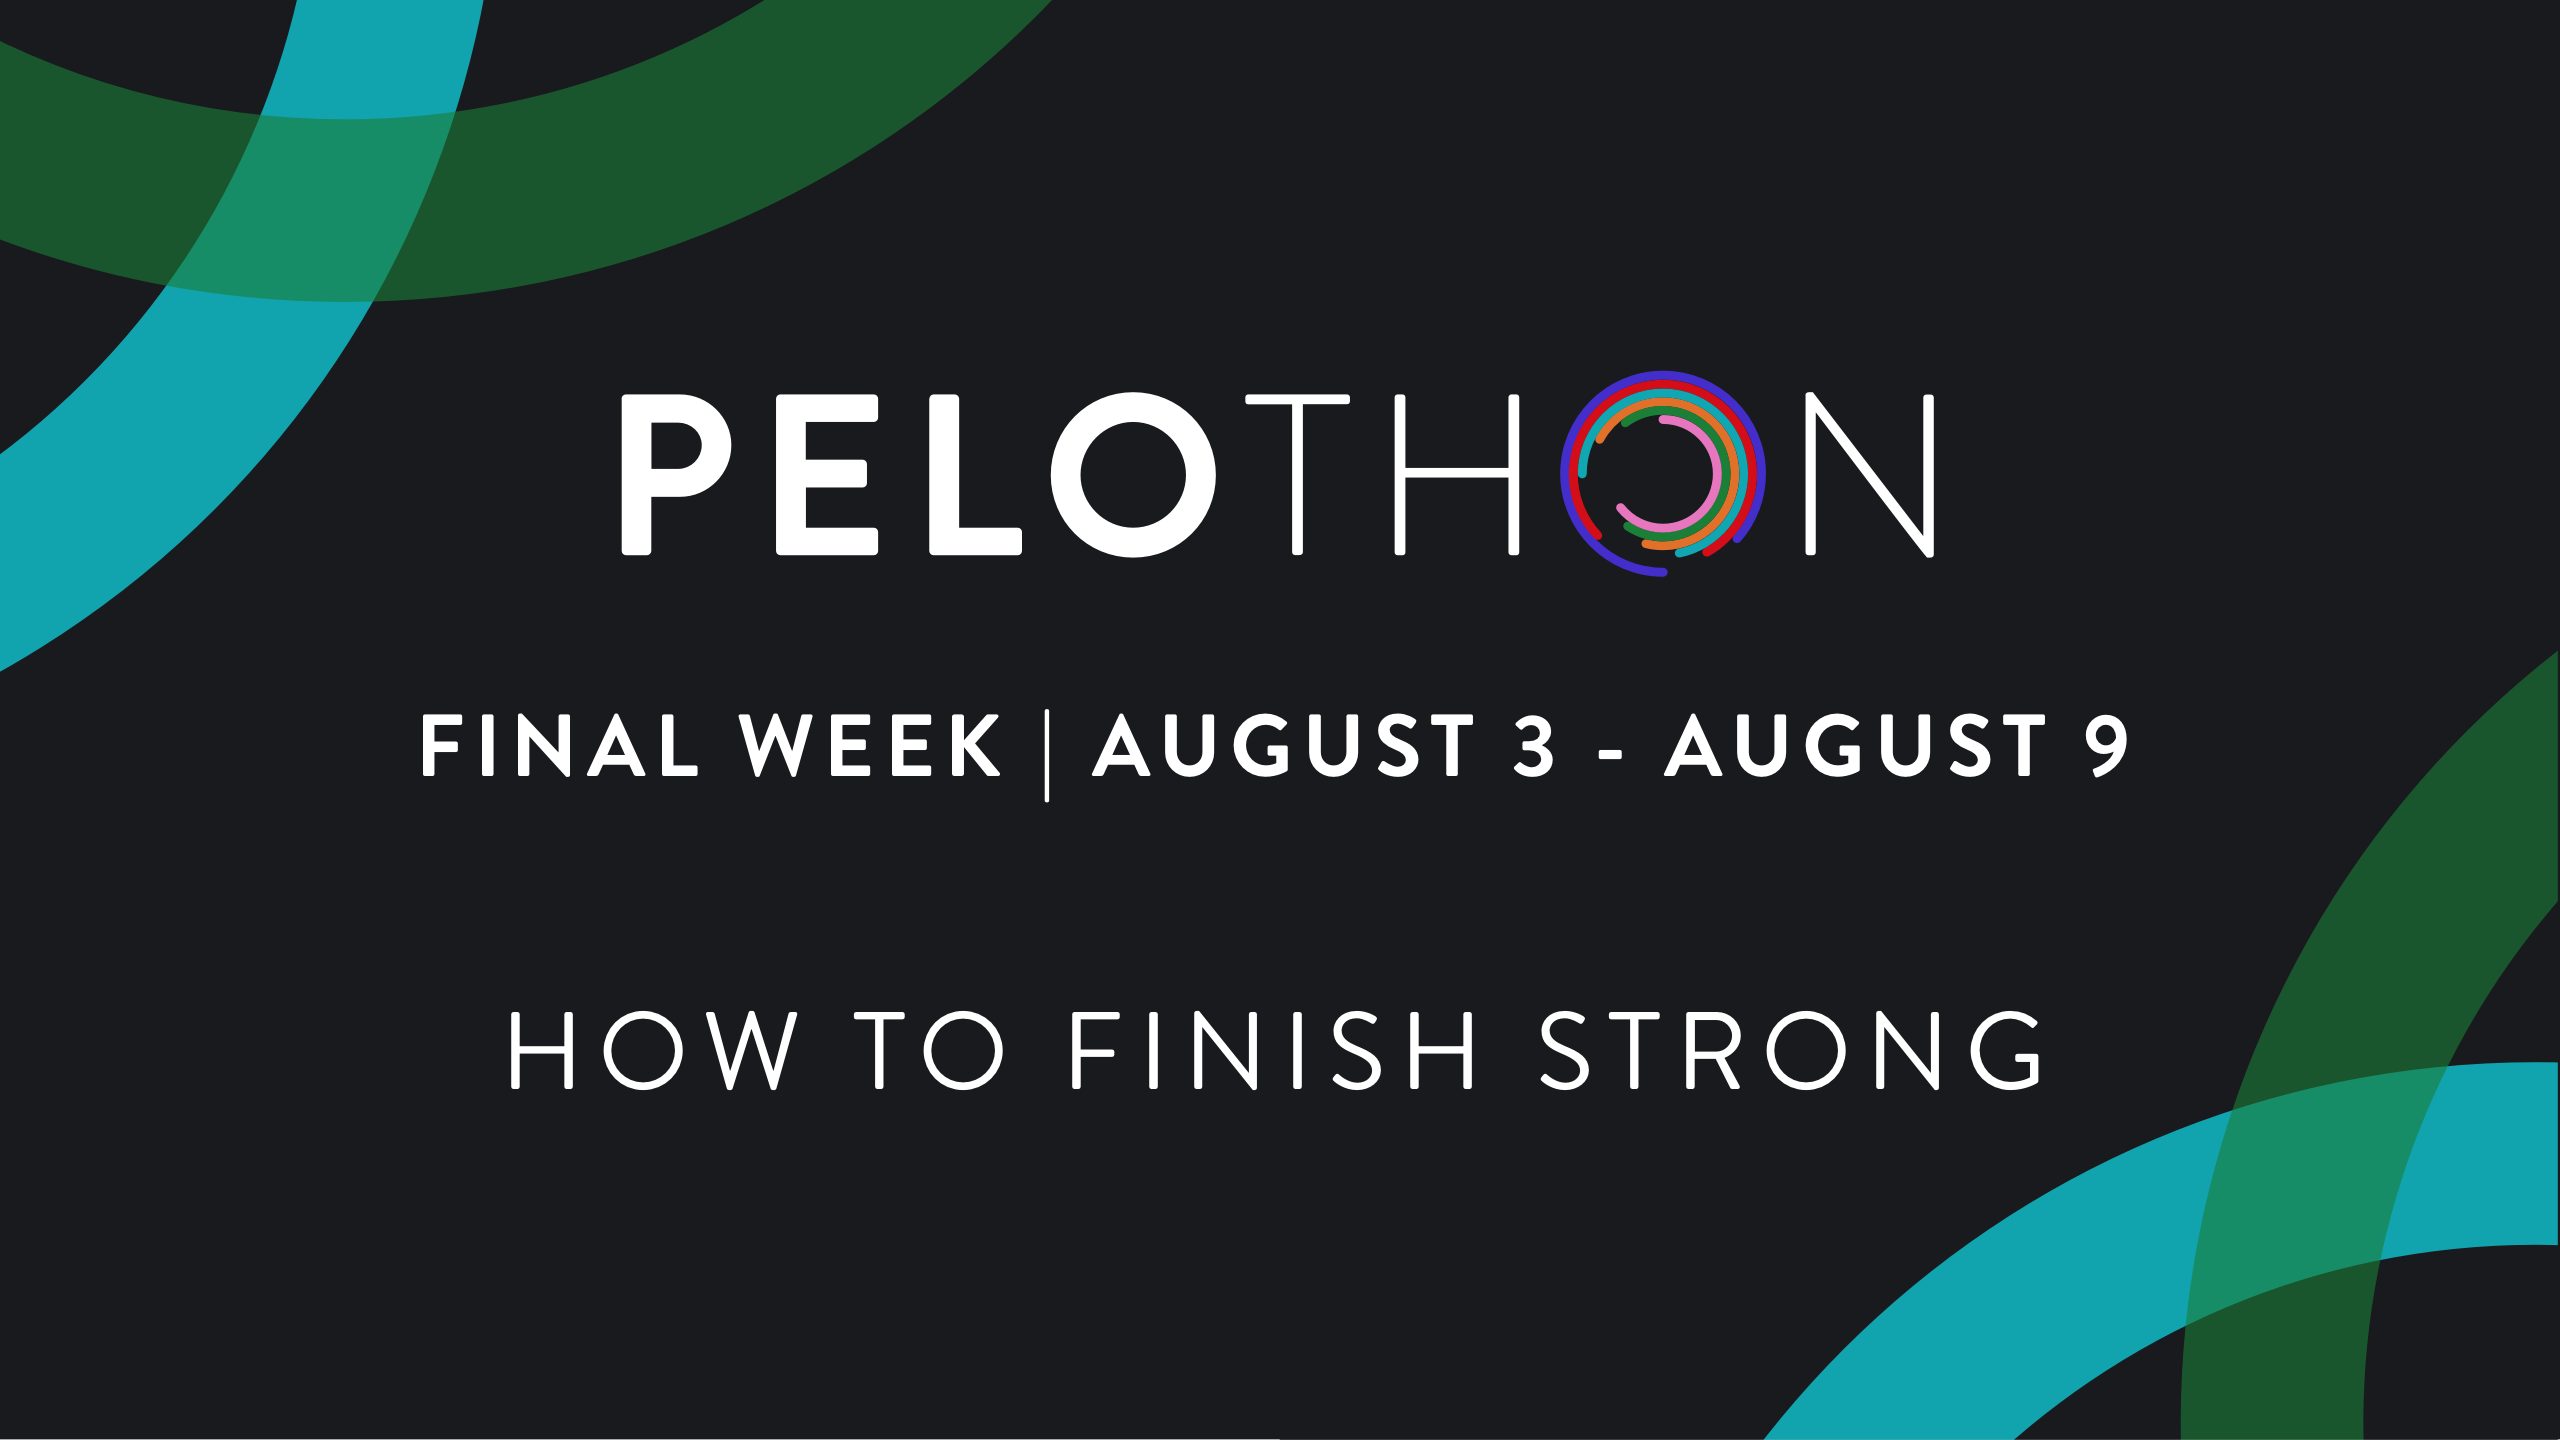 Pelothon 2020 Week 4: How To Finish Strong